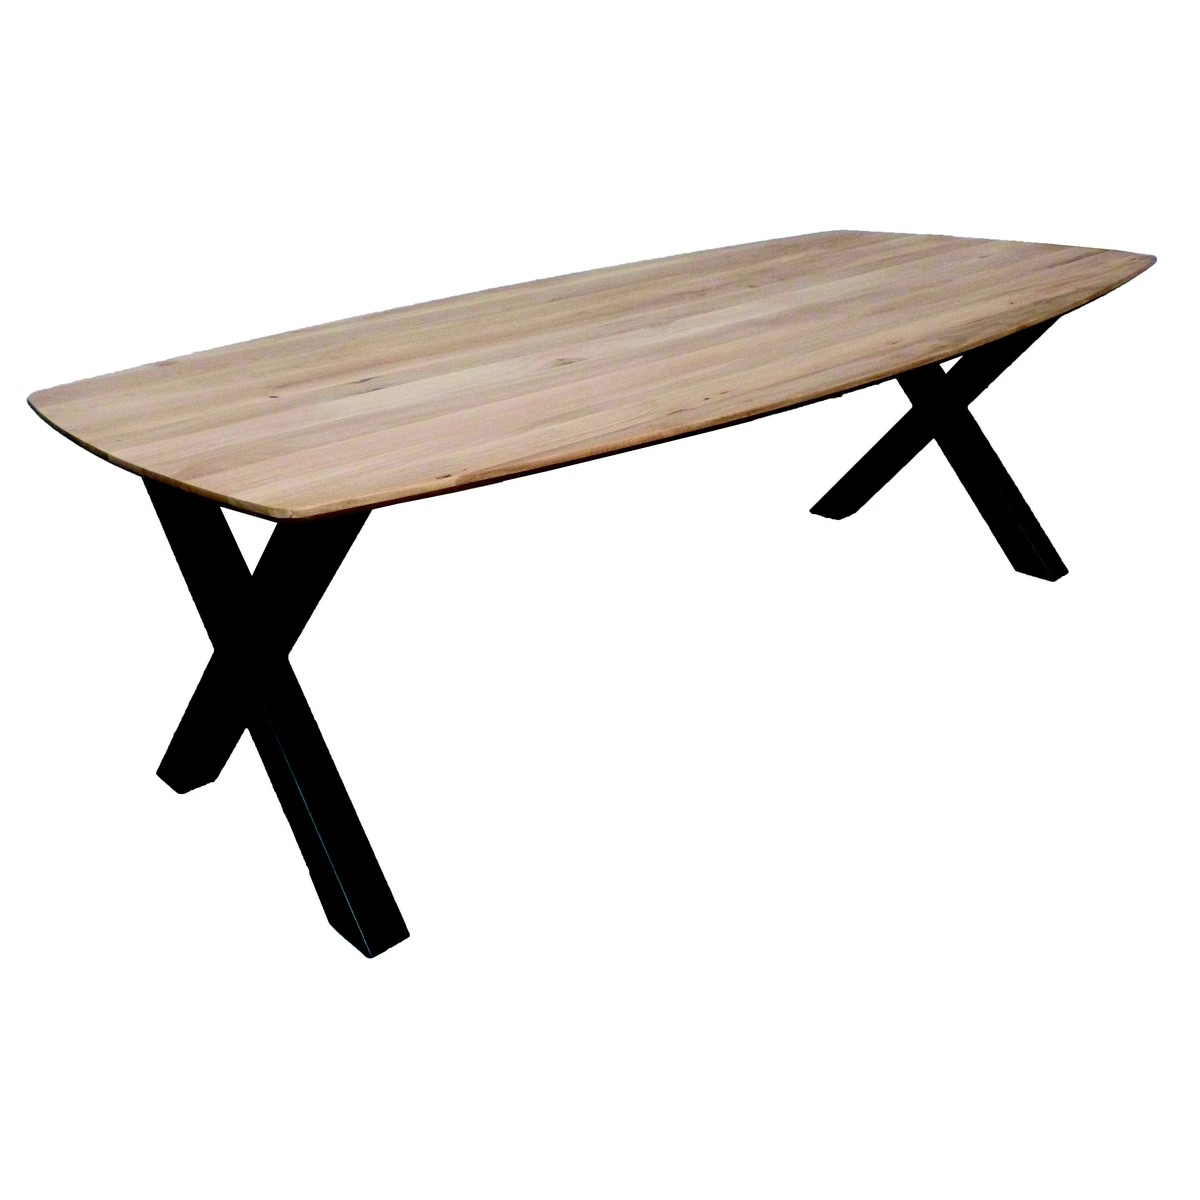   Table Indra Beveled ovale  220x110x77cm